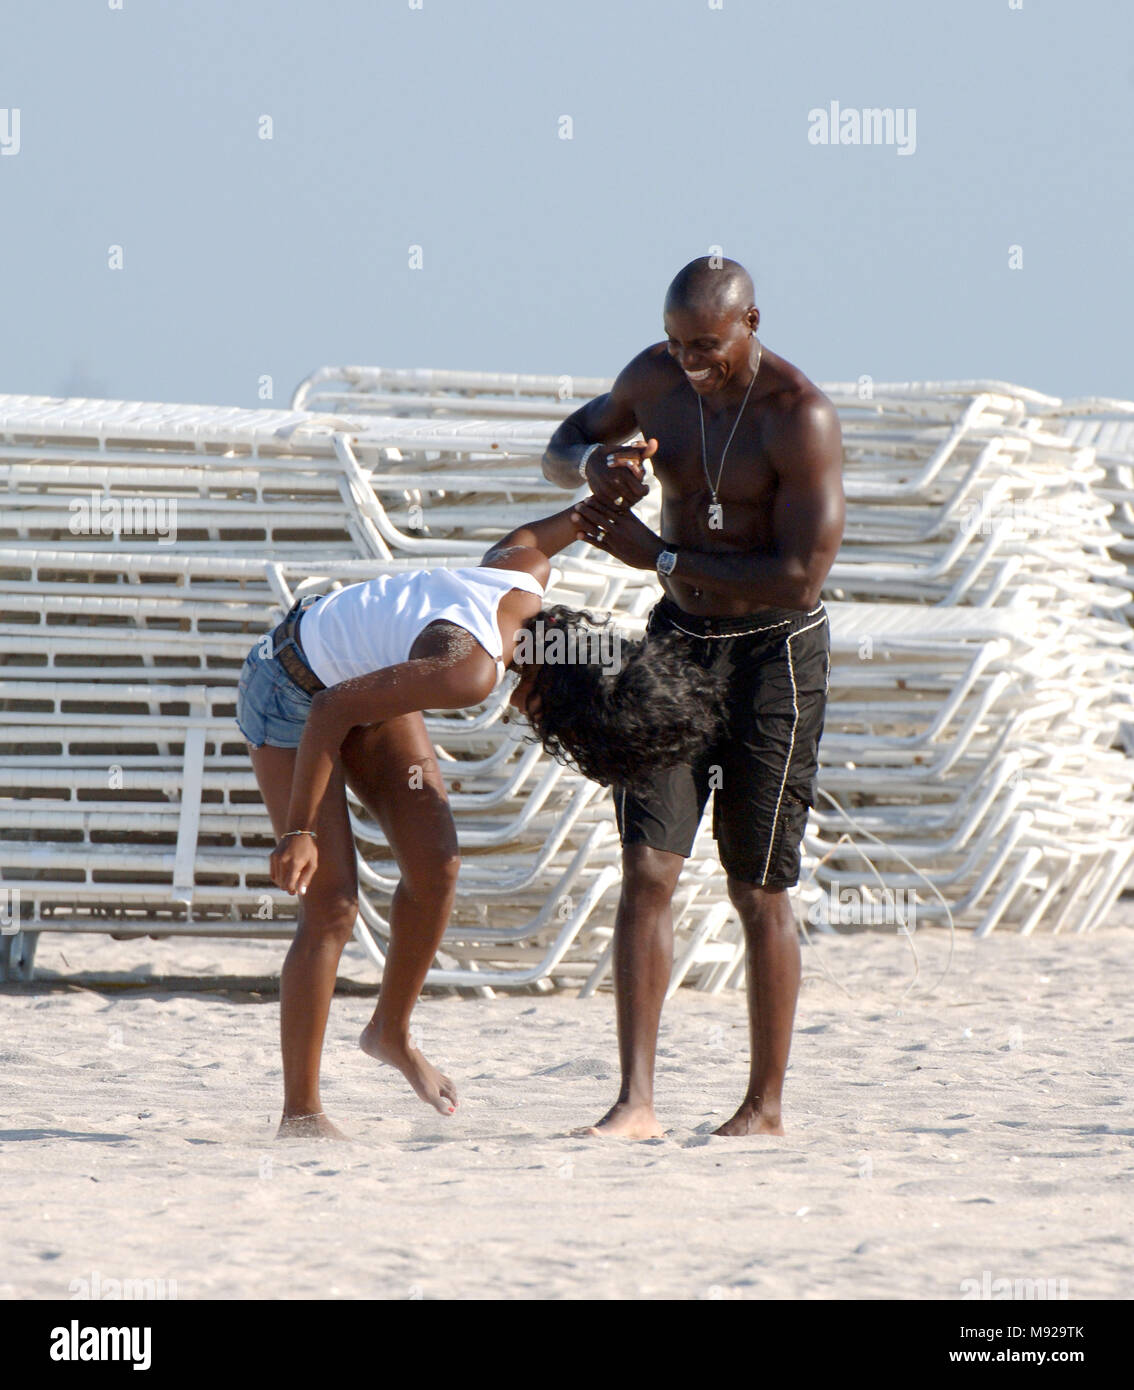 MIAMI BEACH, FL - MAY 30: (EXCLUSIVE COVERAGE) Tennis great Serena Williams  spends the day with an unidentified man on the beach in her bikini, with  her dog, along with her famous